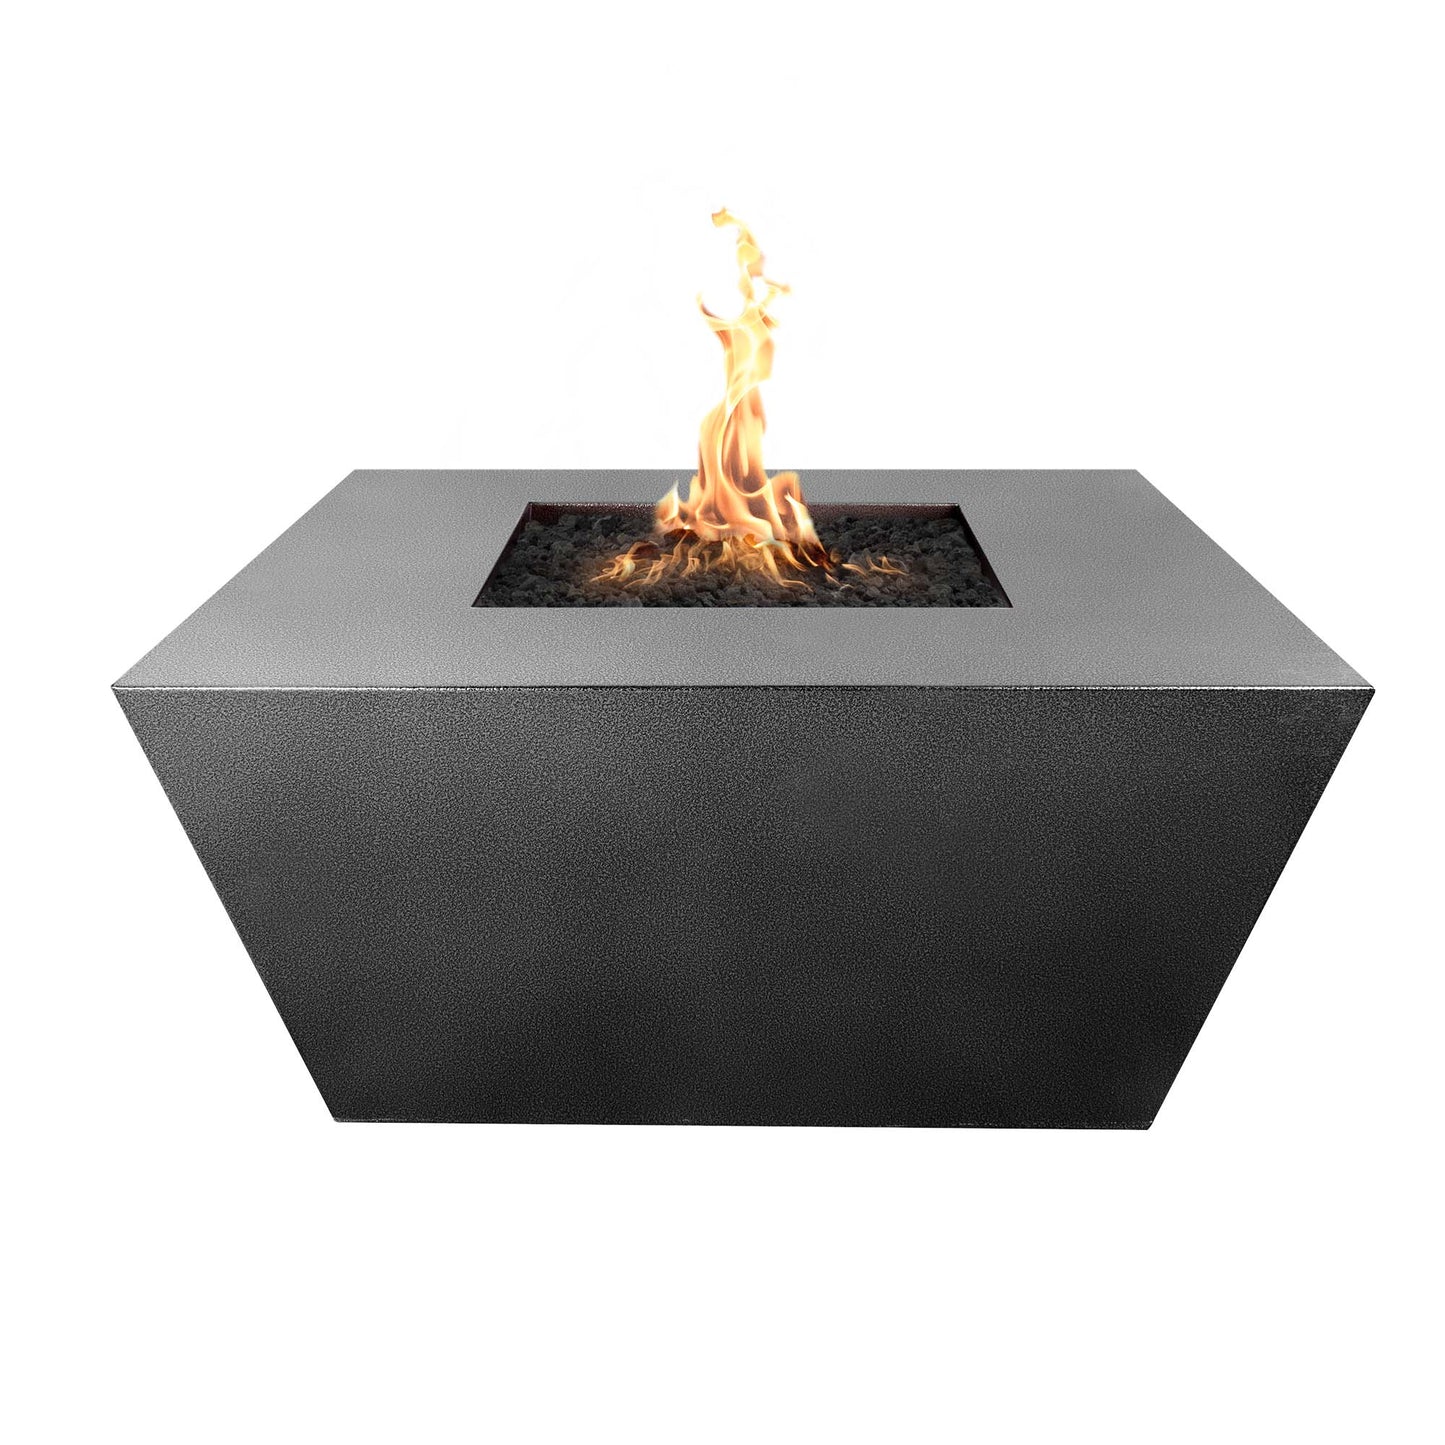 The Outdoor Plus Square Redan 48" Stainless Steel Liquid Propane Fire Pit with 12V Electronic Ignition